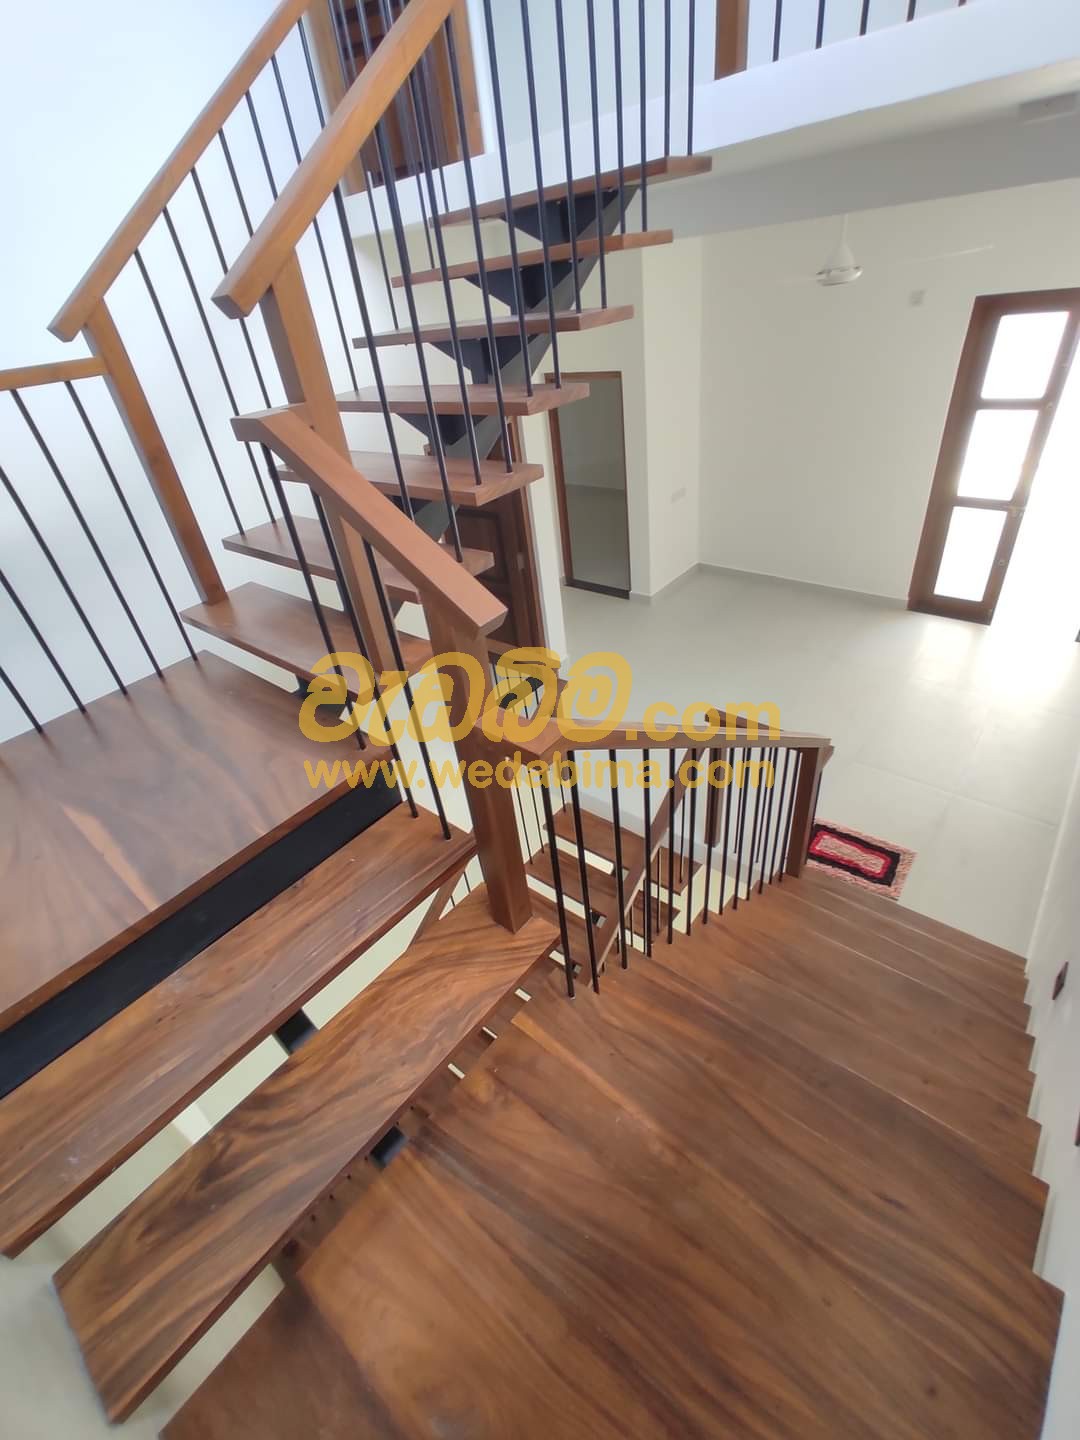 Staircase price in colombo